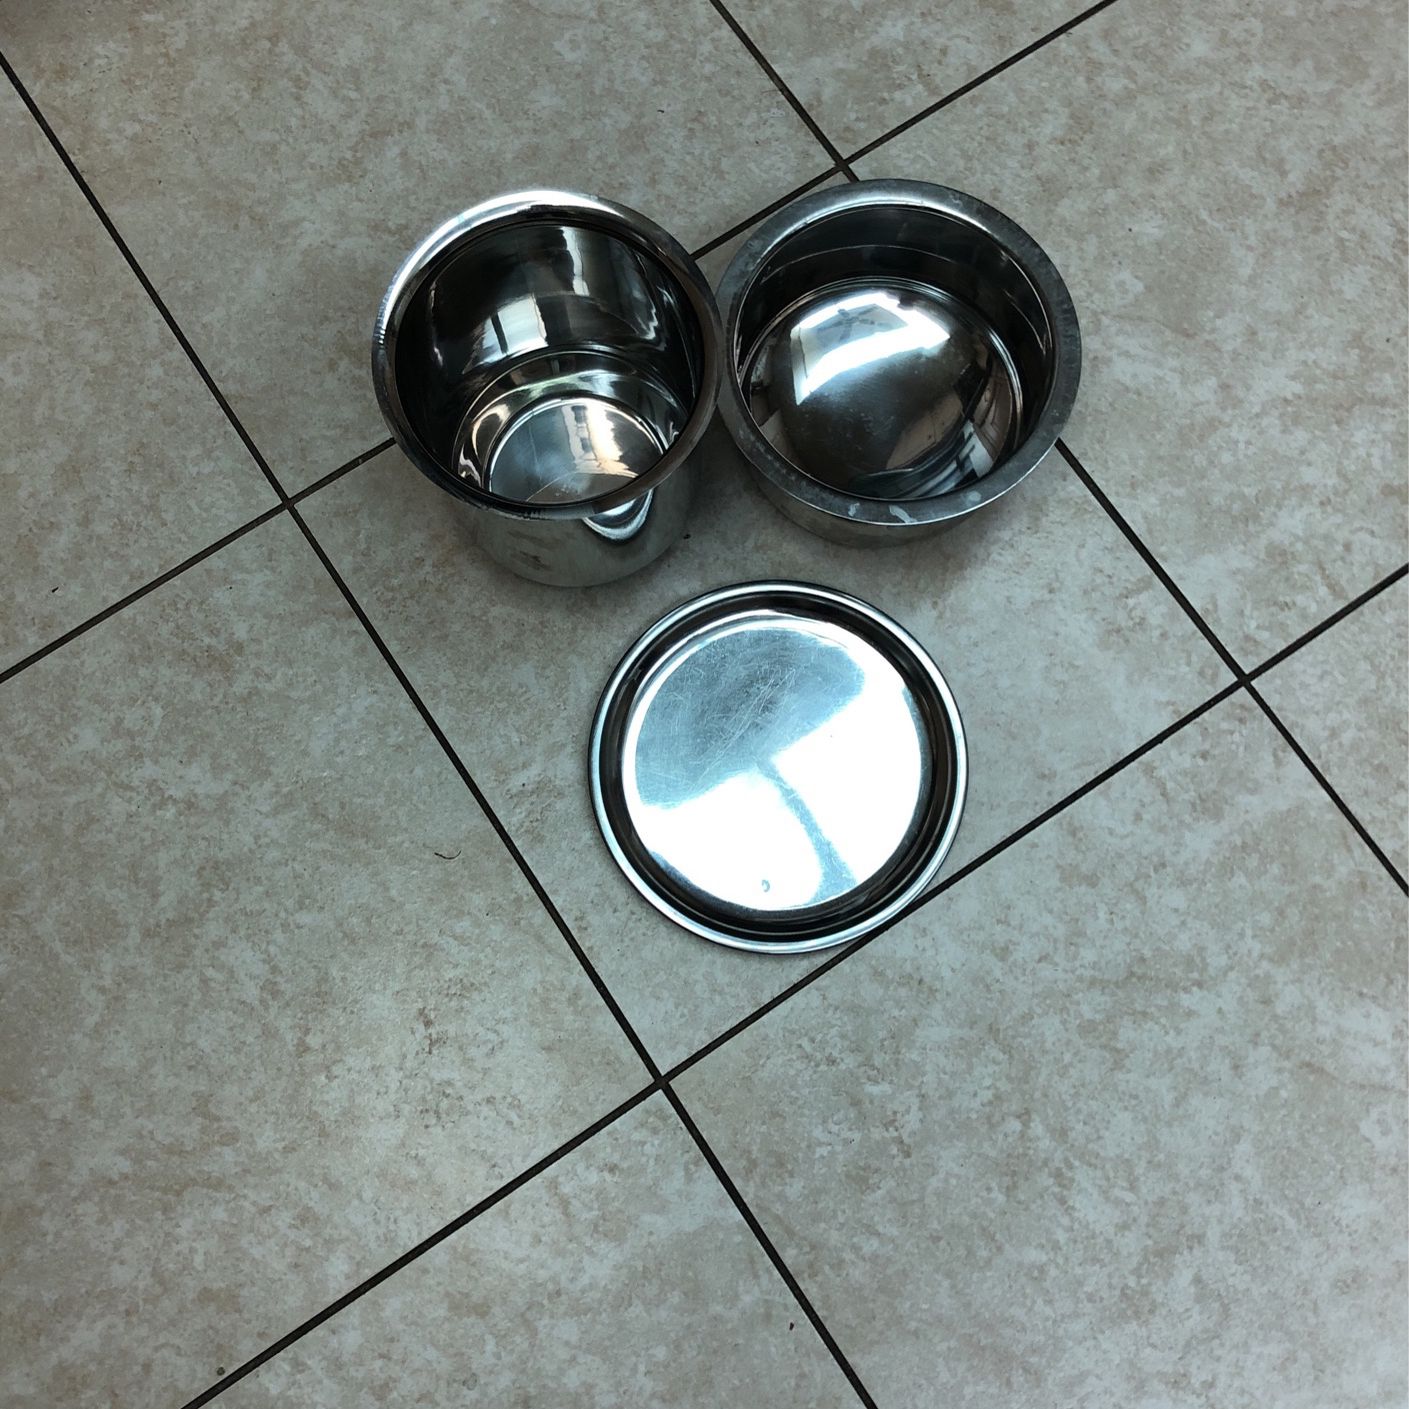 2 Stainless Steel Cooking Pots With One Cover/lid